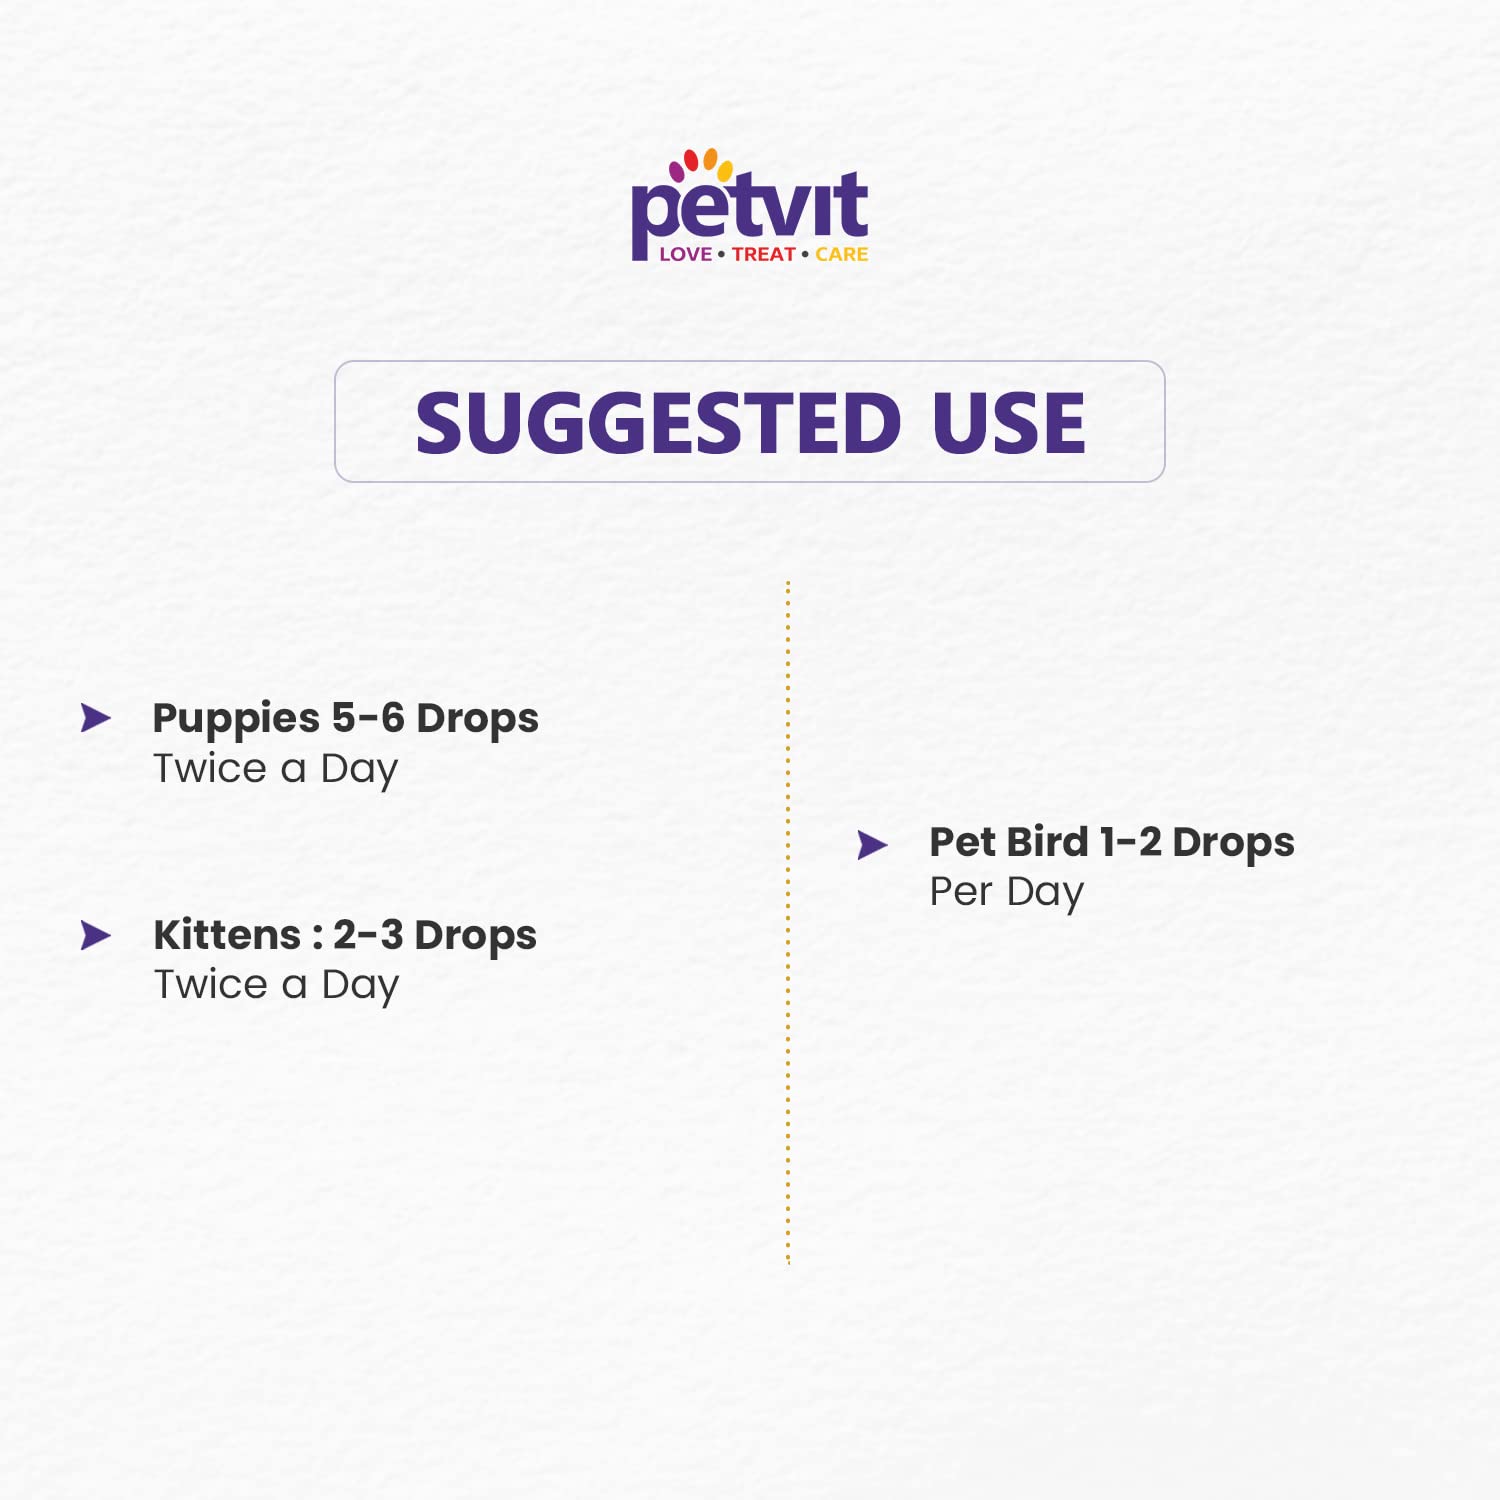 Petvit Anti Flatulence Enzyme Drop with Alpha -Amylase, Papain, Cinnamon Oil, Cardamom Oil, Caraway Oil | Helps Support Healthy Digestion | Safe & Natural | for All Ages Breed Dogs & Cats – 30 ml